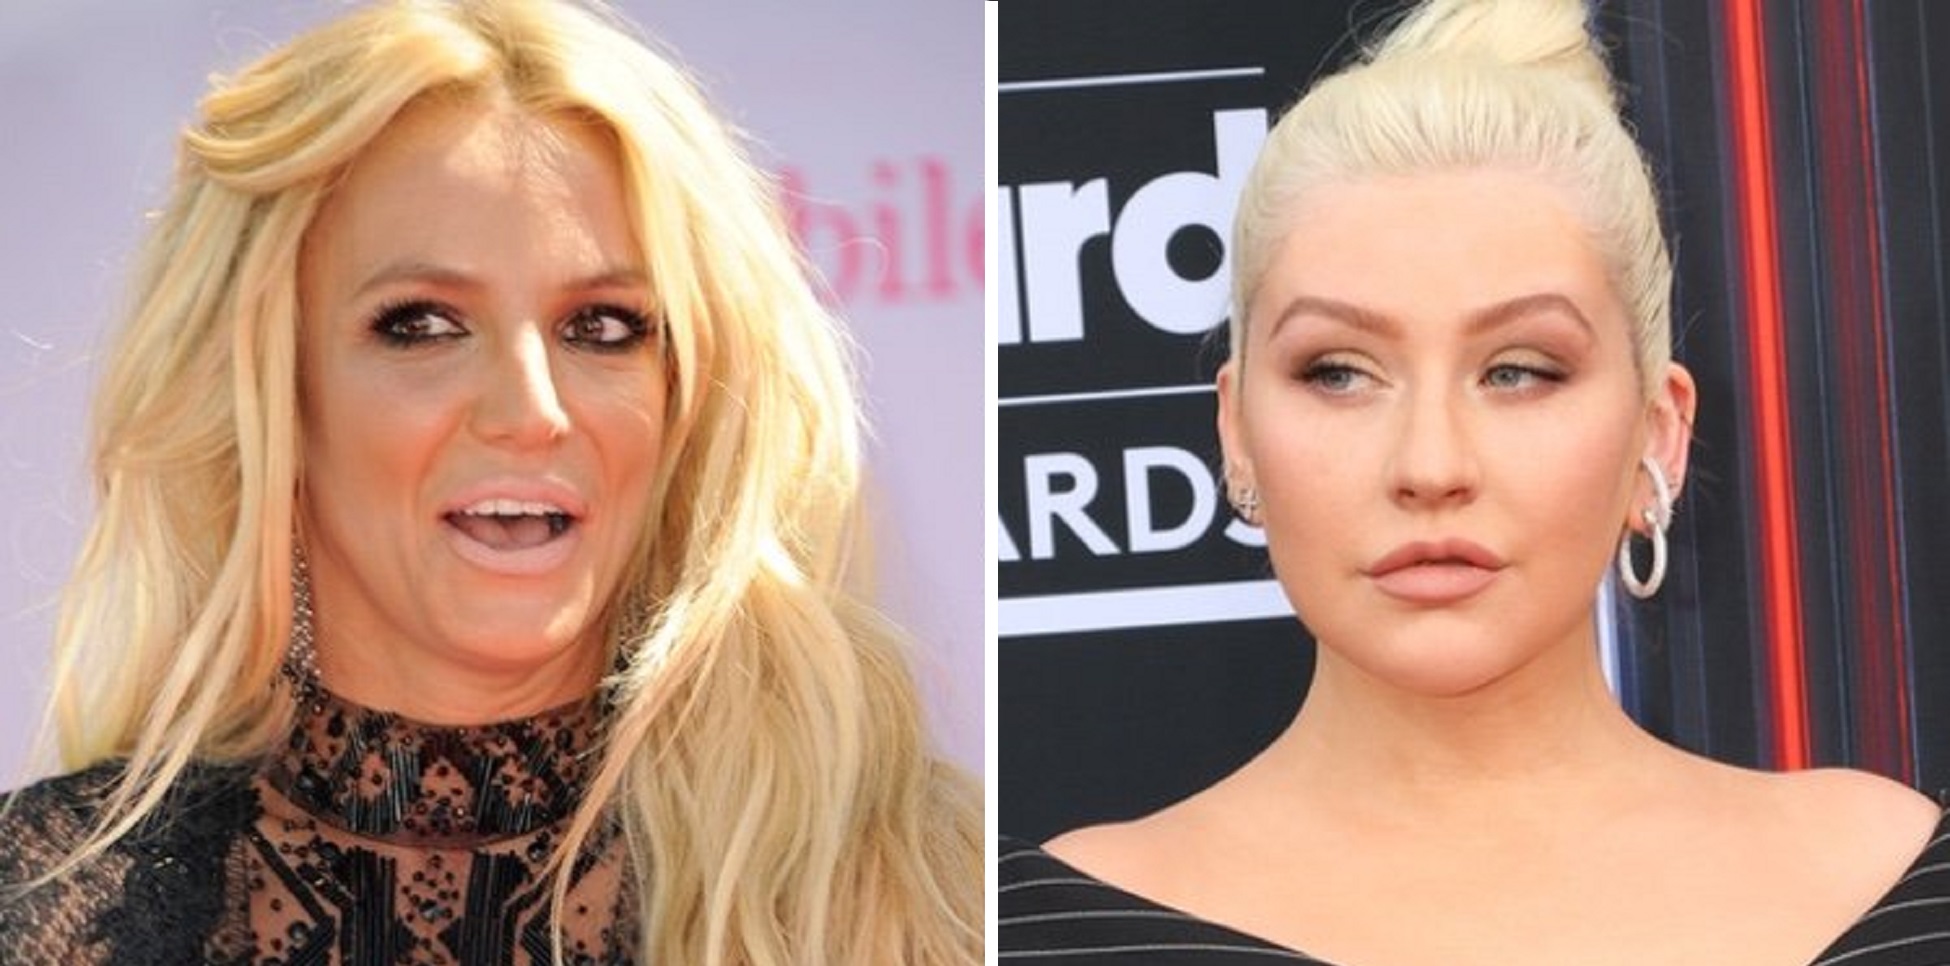 Drama: Britney Spears Accused Of Body Shaming Christina Aguilera, ‘Dirrty’ Singer Unfollows Her On Instagram